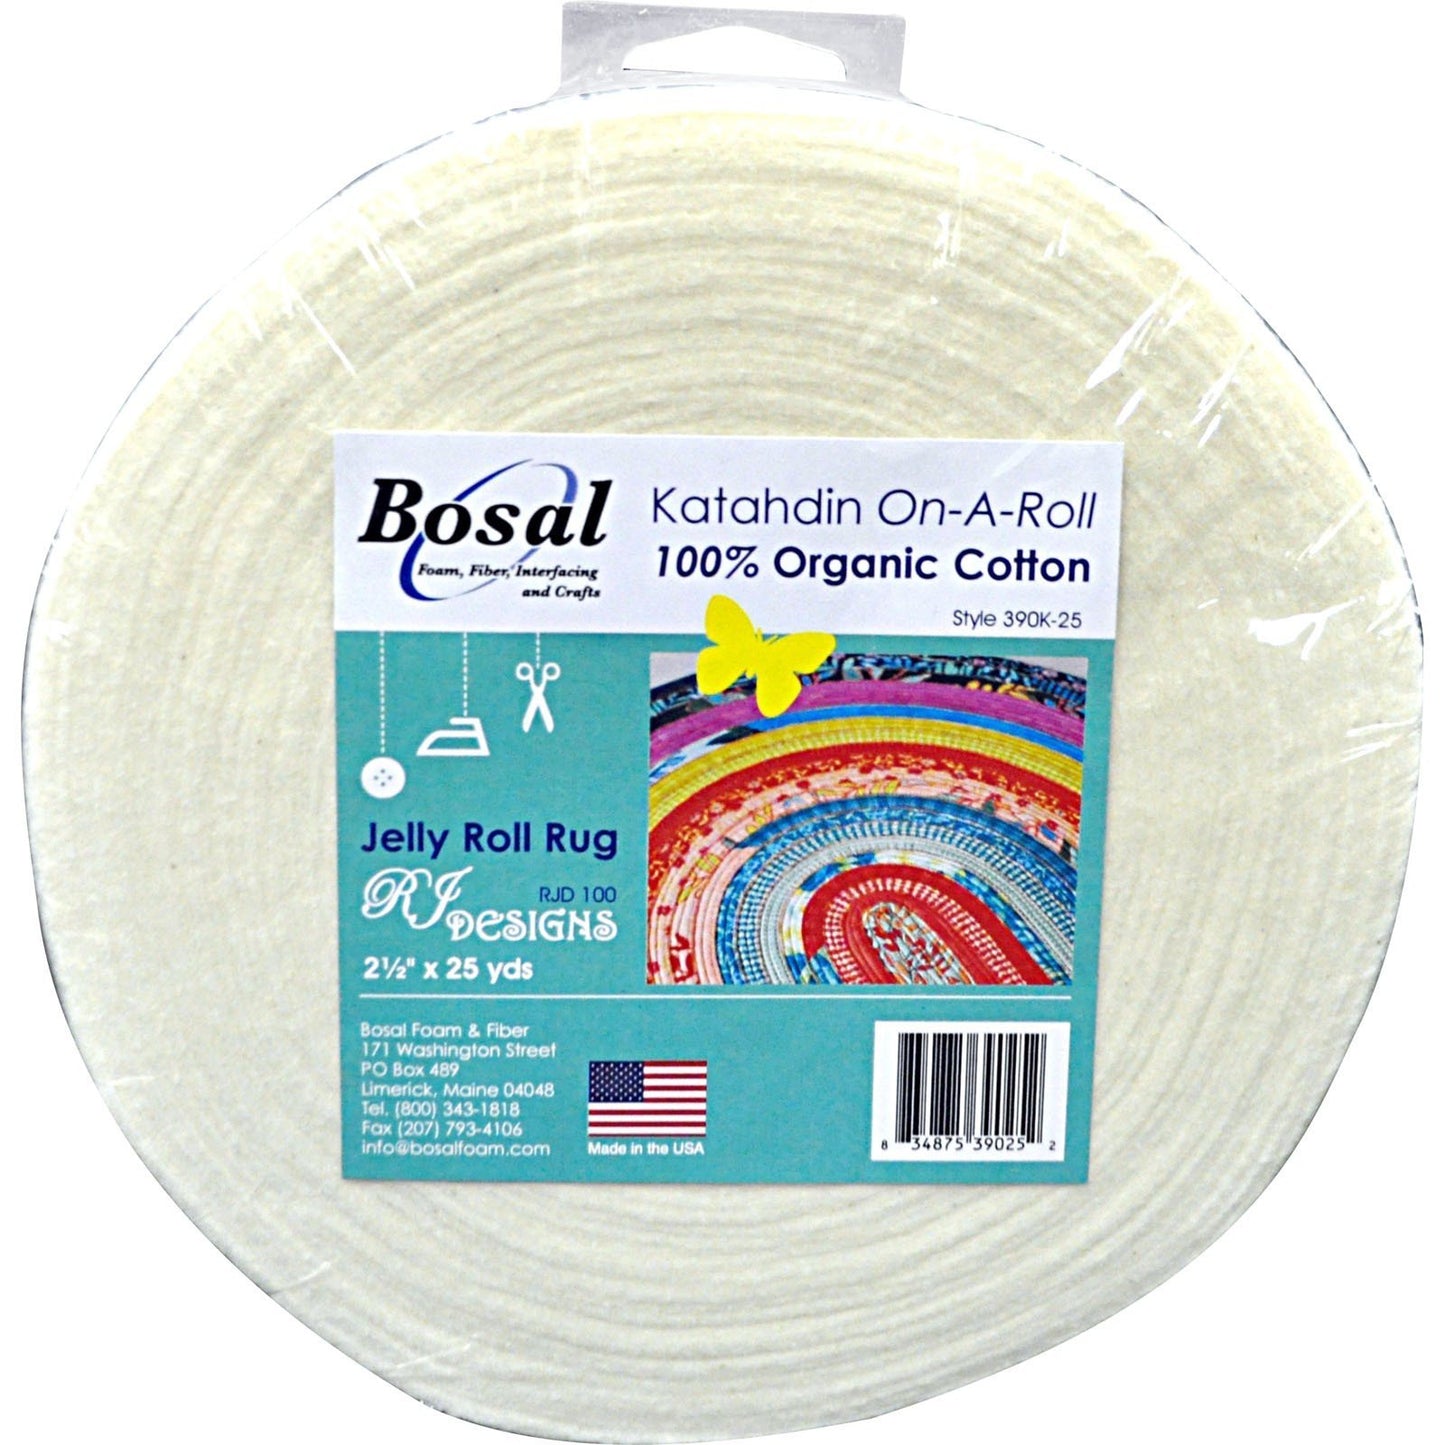 Bosal Katahdin On-A-Roll - Licence To Quilt